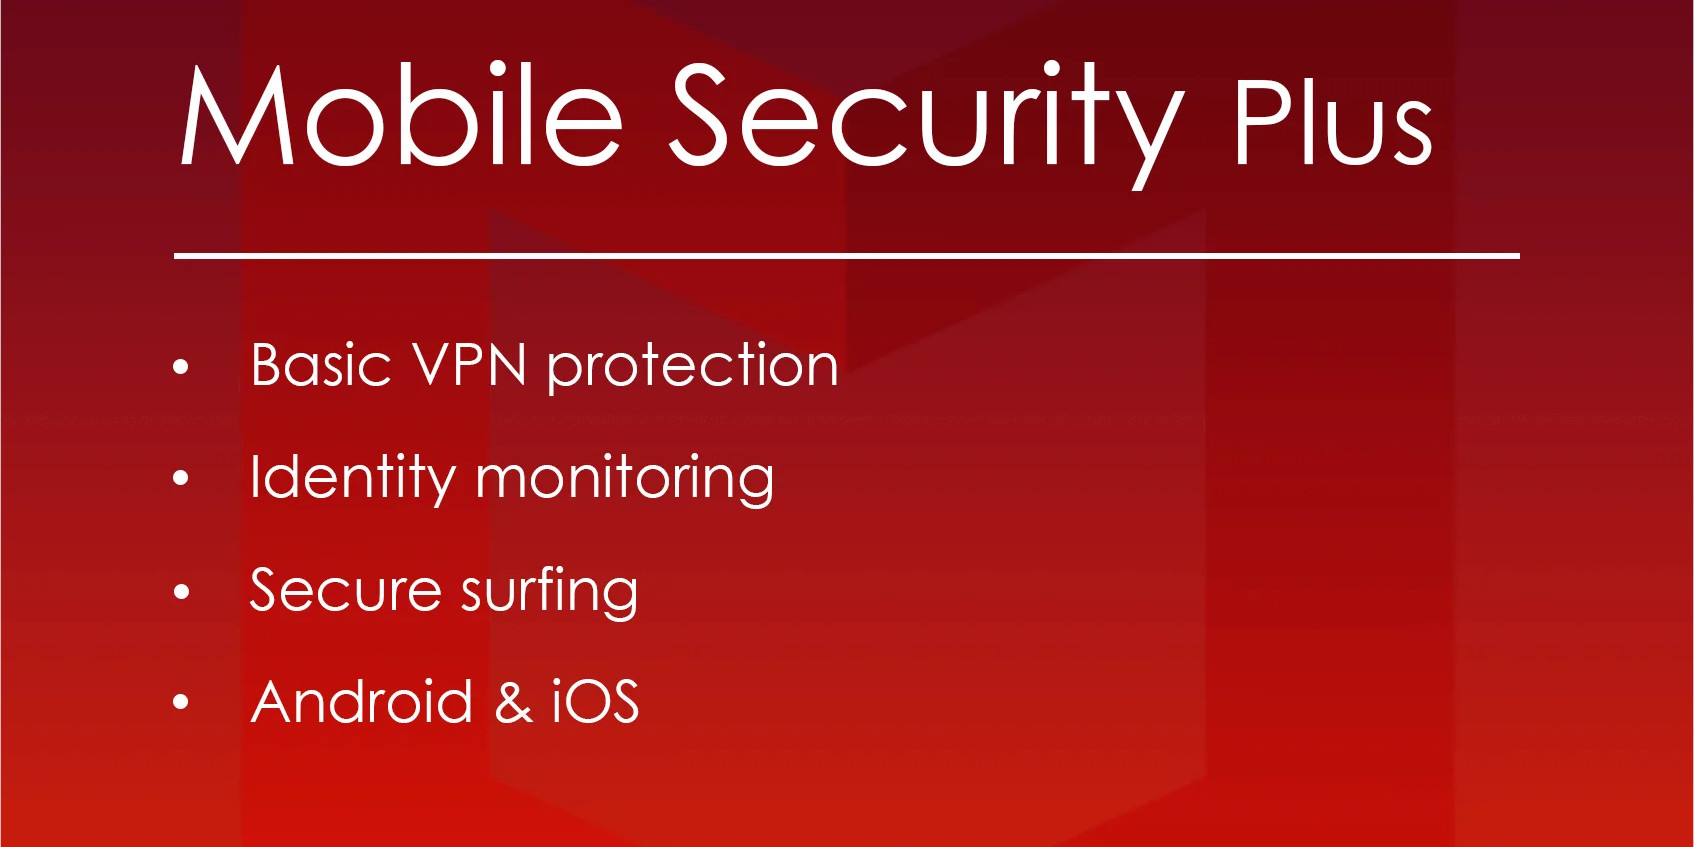 McAfee Mobile Security Plus VPN Key (1 Year / Unlimited Devices), 6.75$